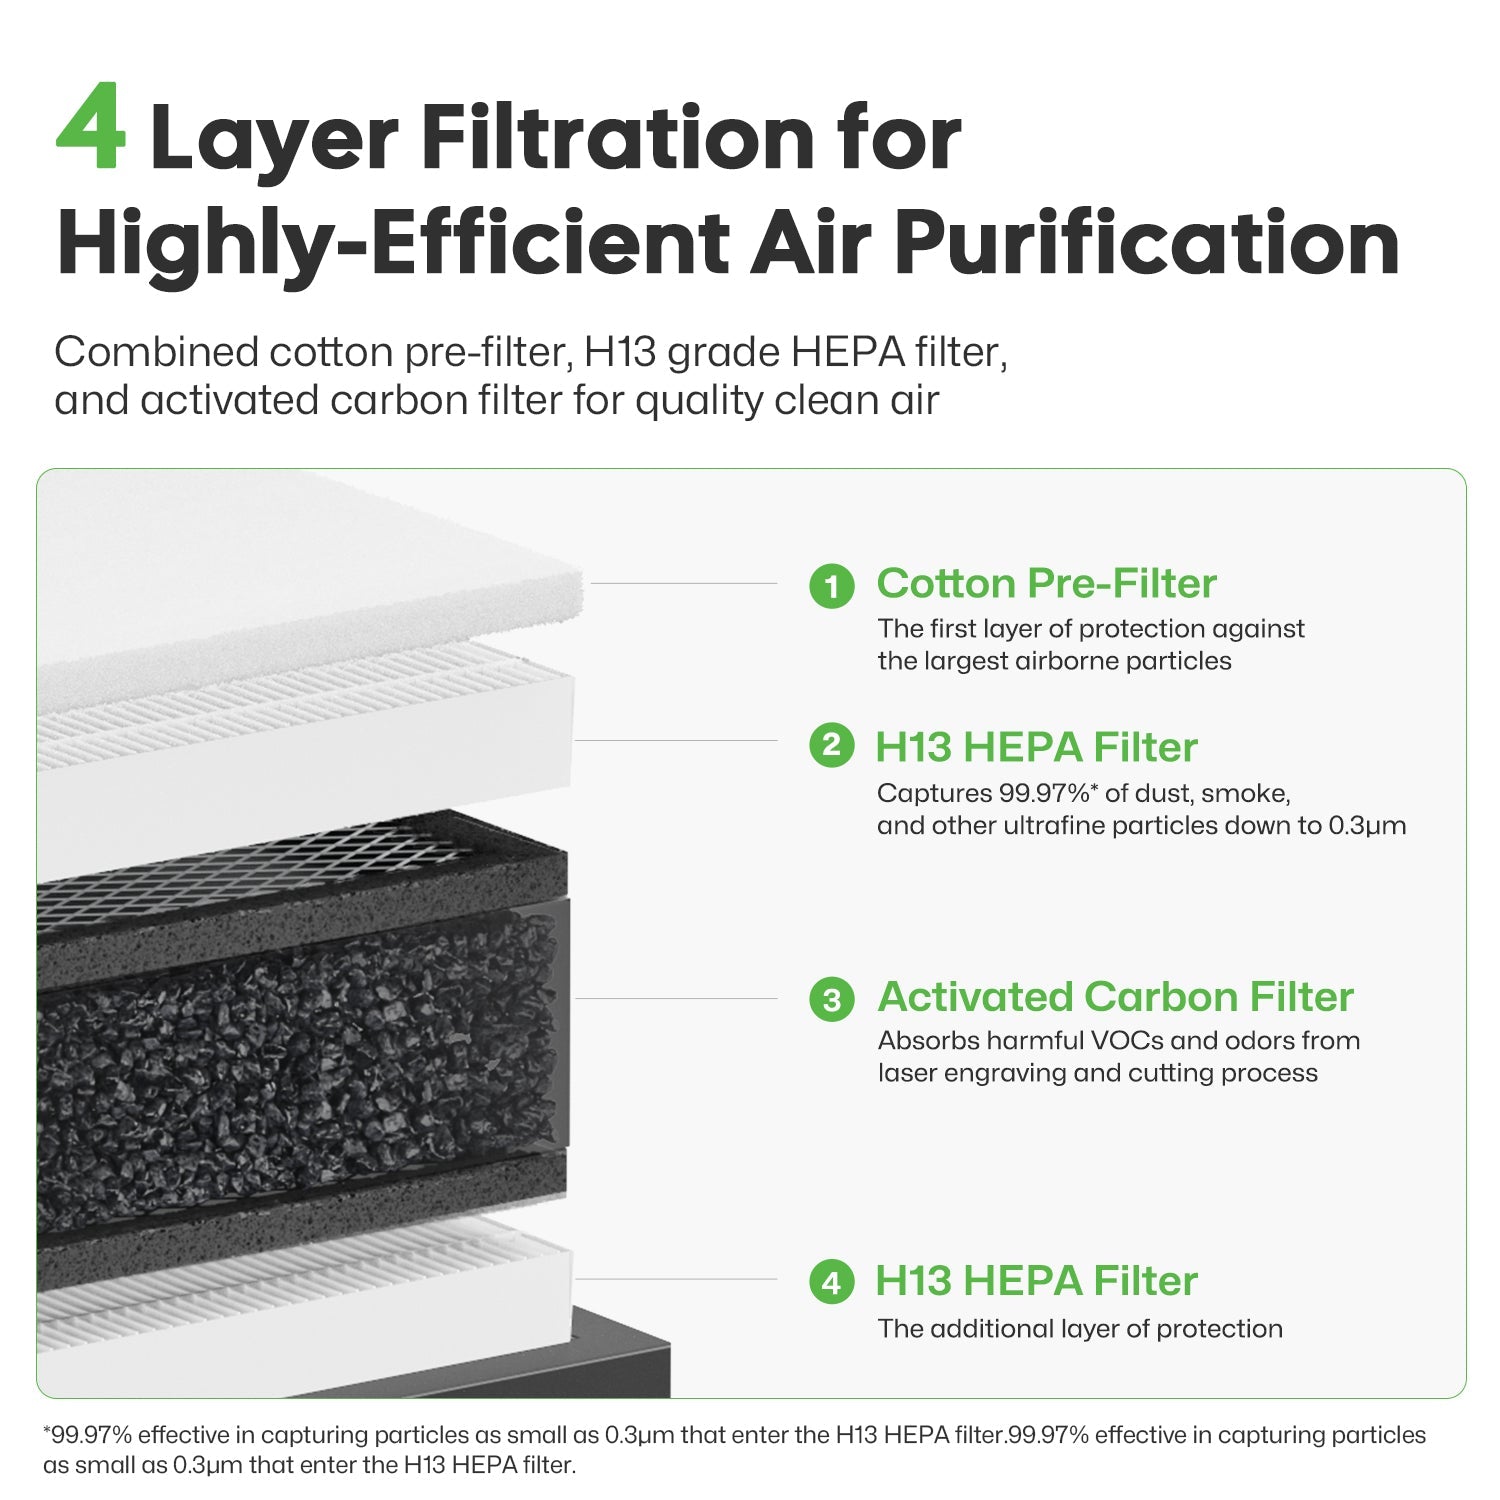 4-layer filtration system